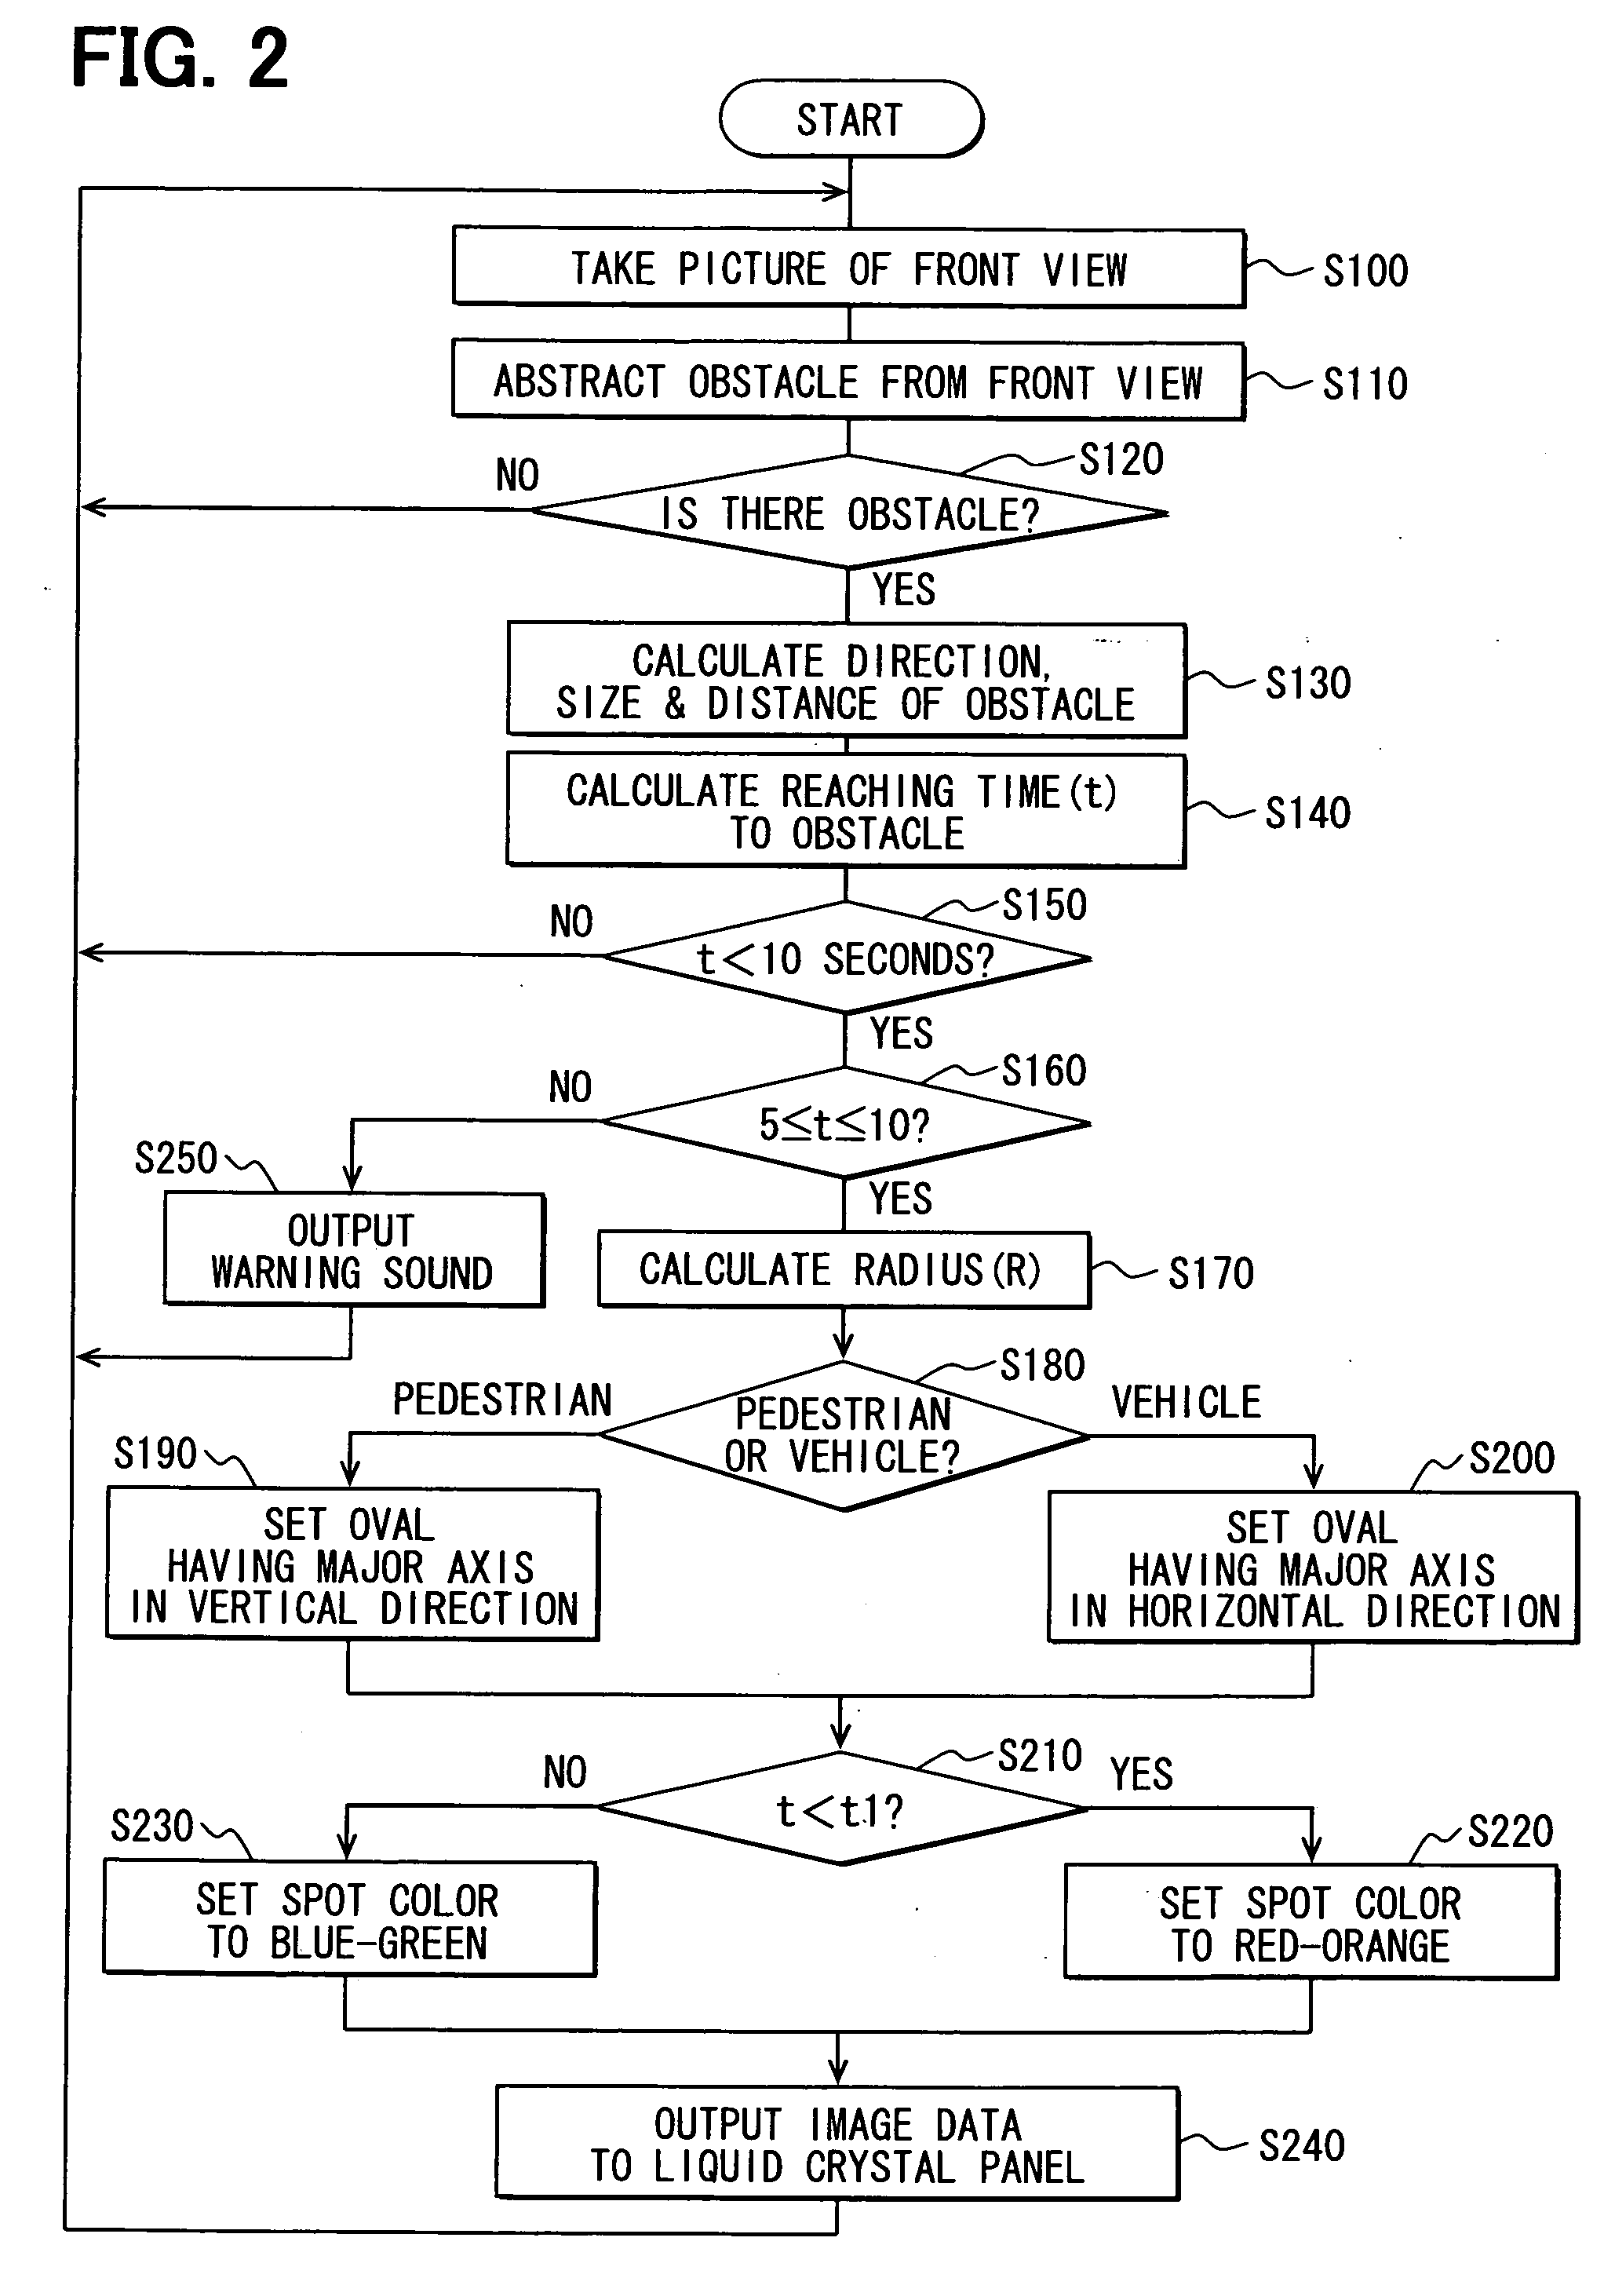 Automotive display device showing virtual image spot encircling front obstacle